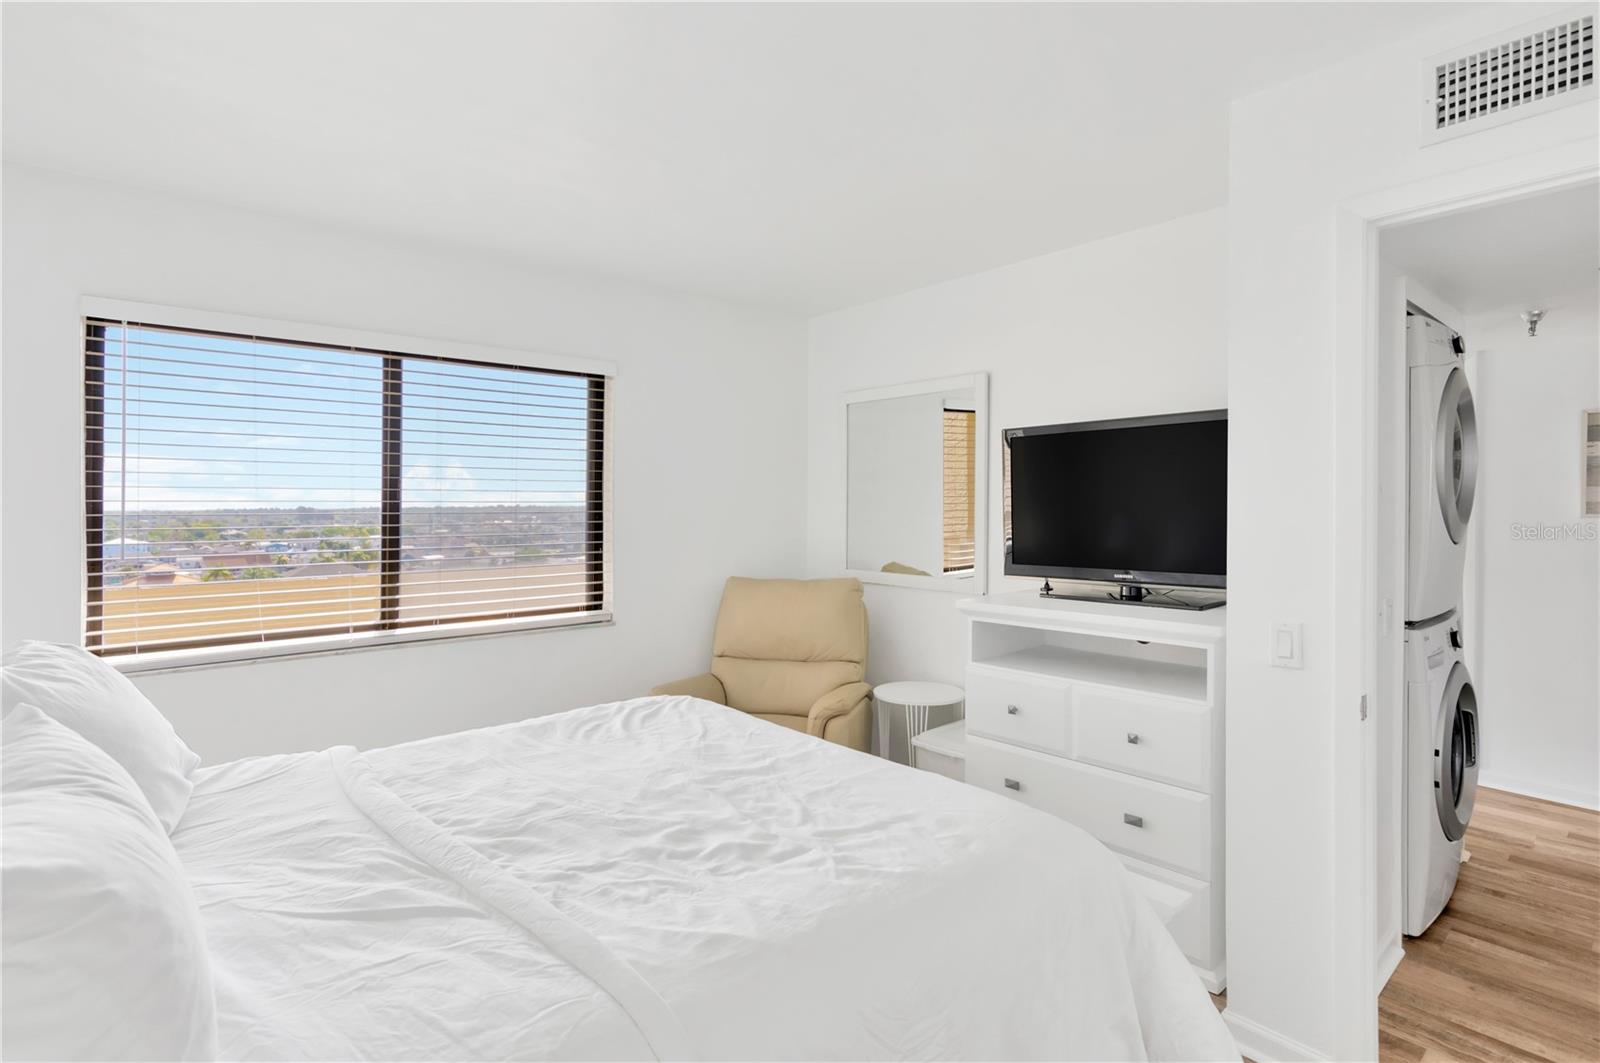 Guest bedroom is crisp & inviting with large window for natural light.